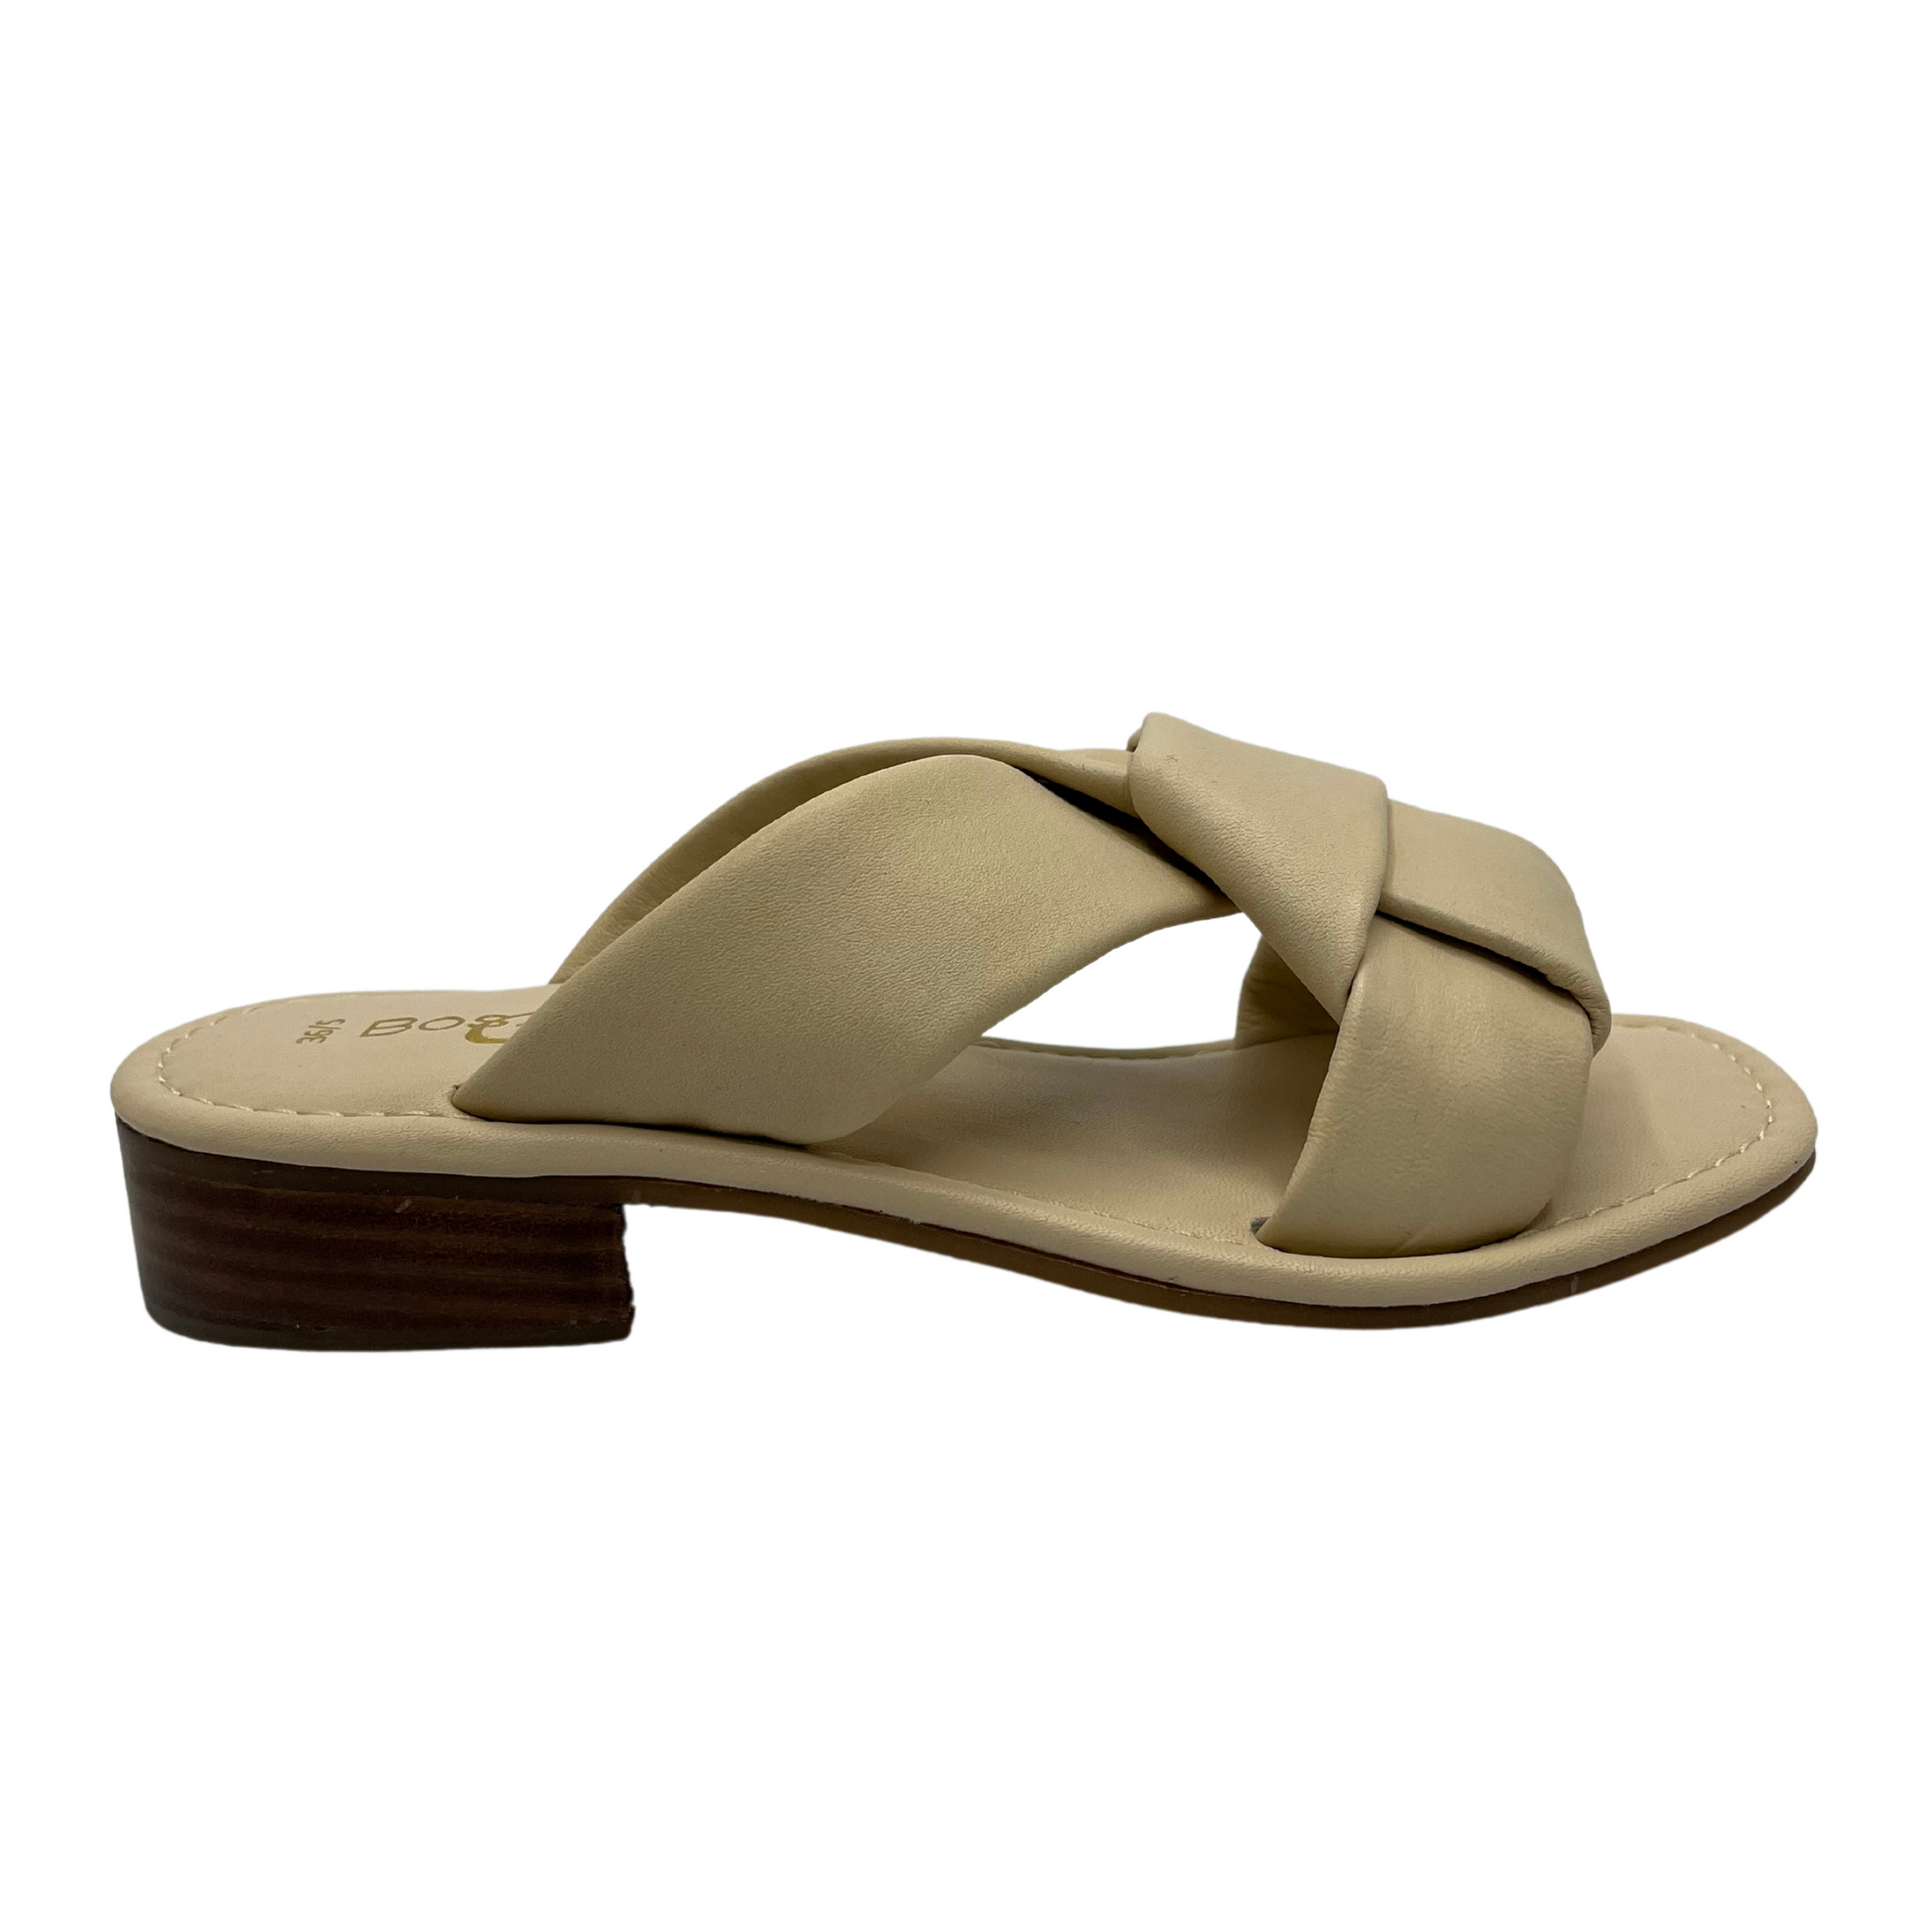 Right facing view of cream leather sandal with short block heel and large knot detail on straps.